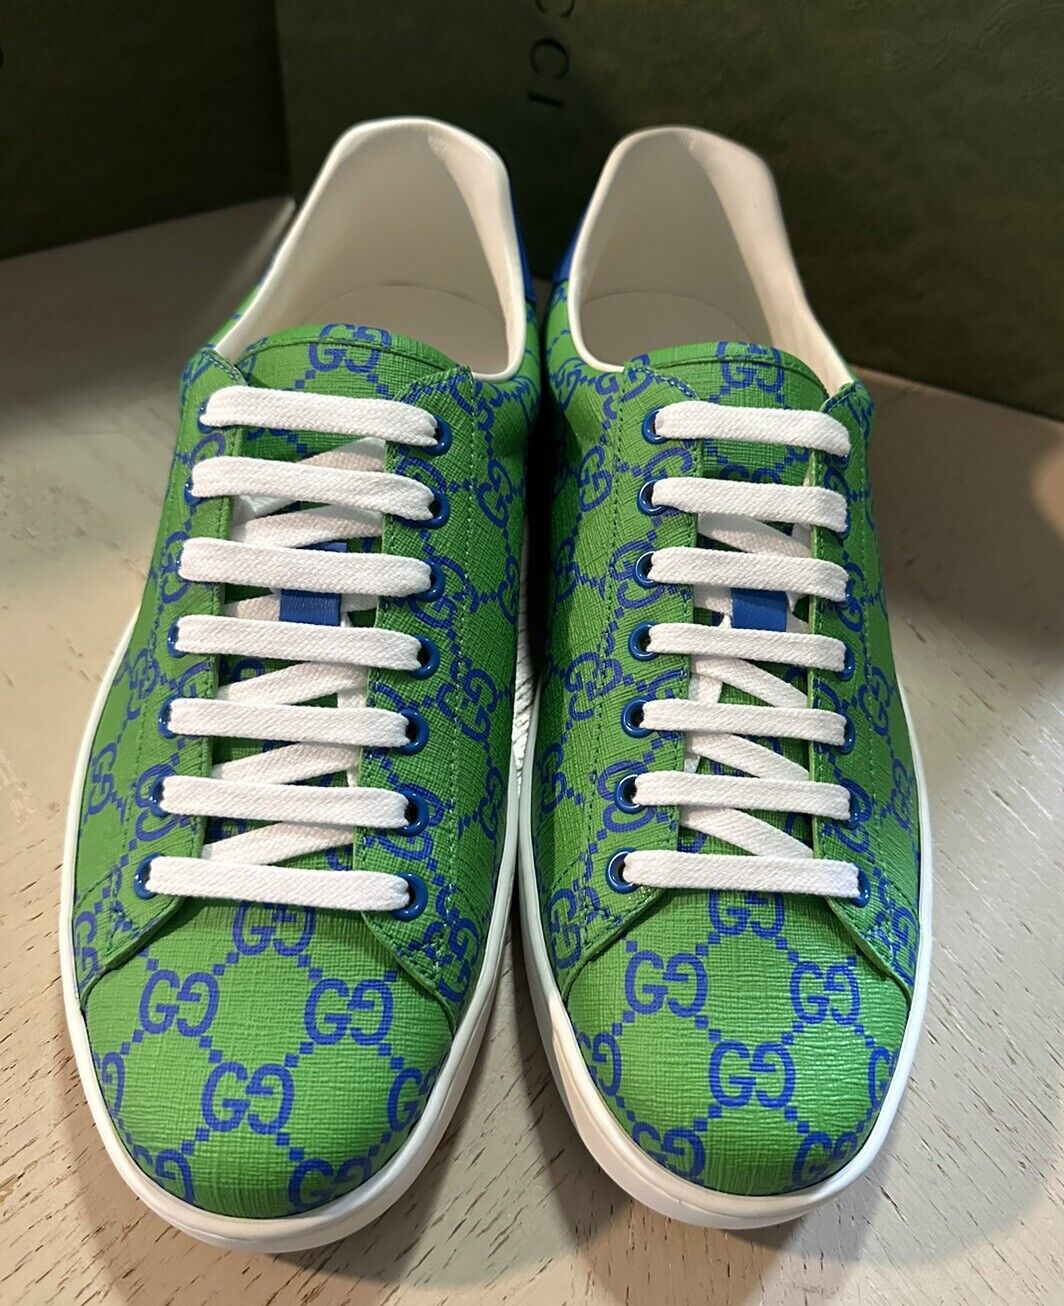 New Gucci Men’s GG Supreme Low Top Sneakers Green/Blue 9 US/8 UK 733631